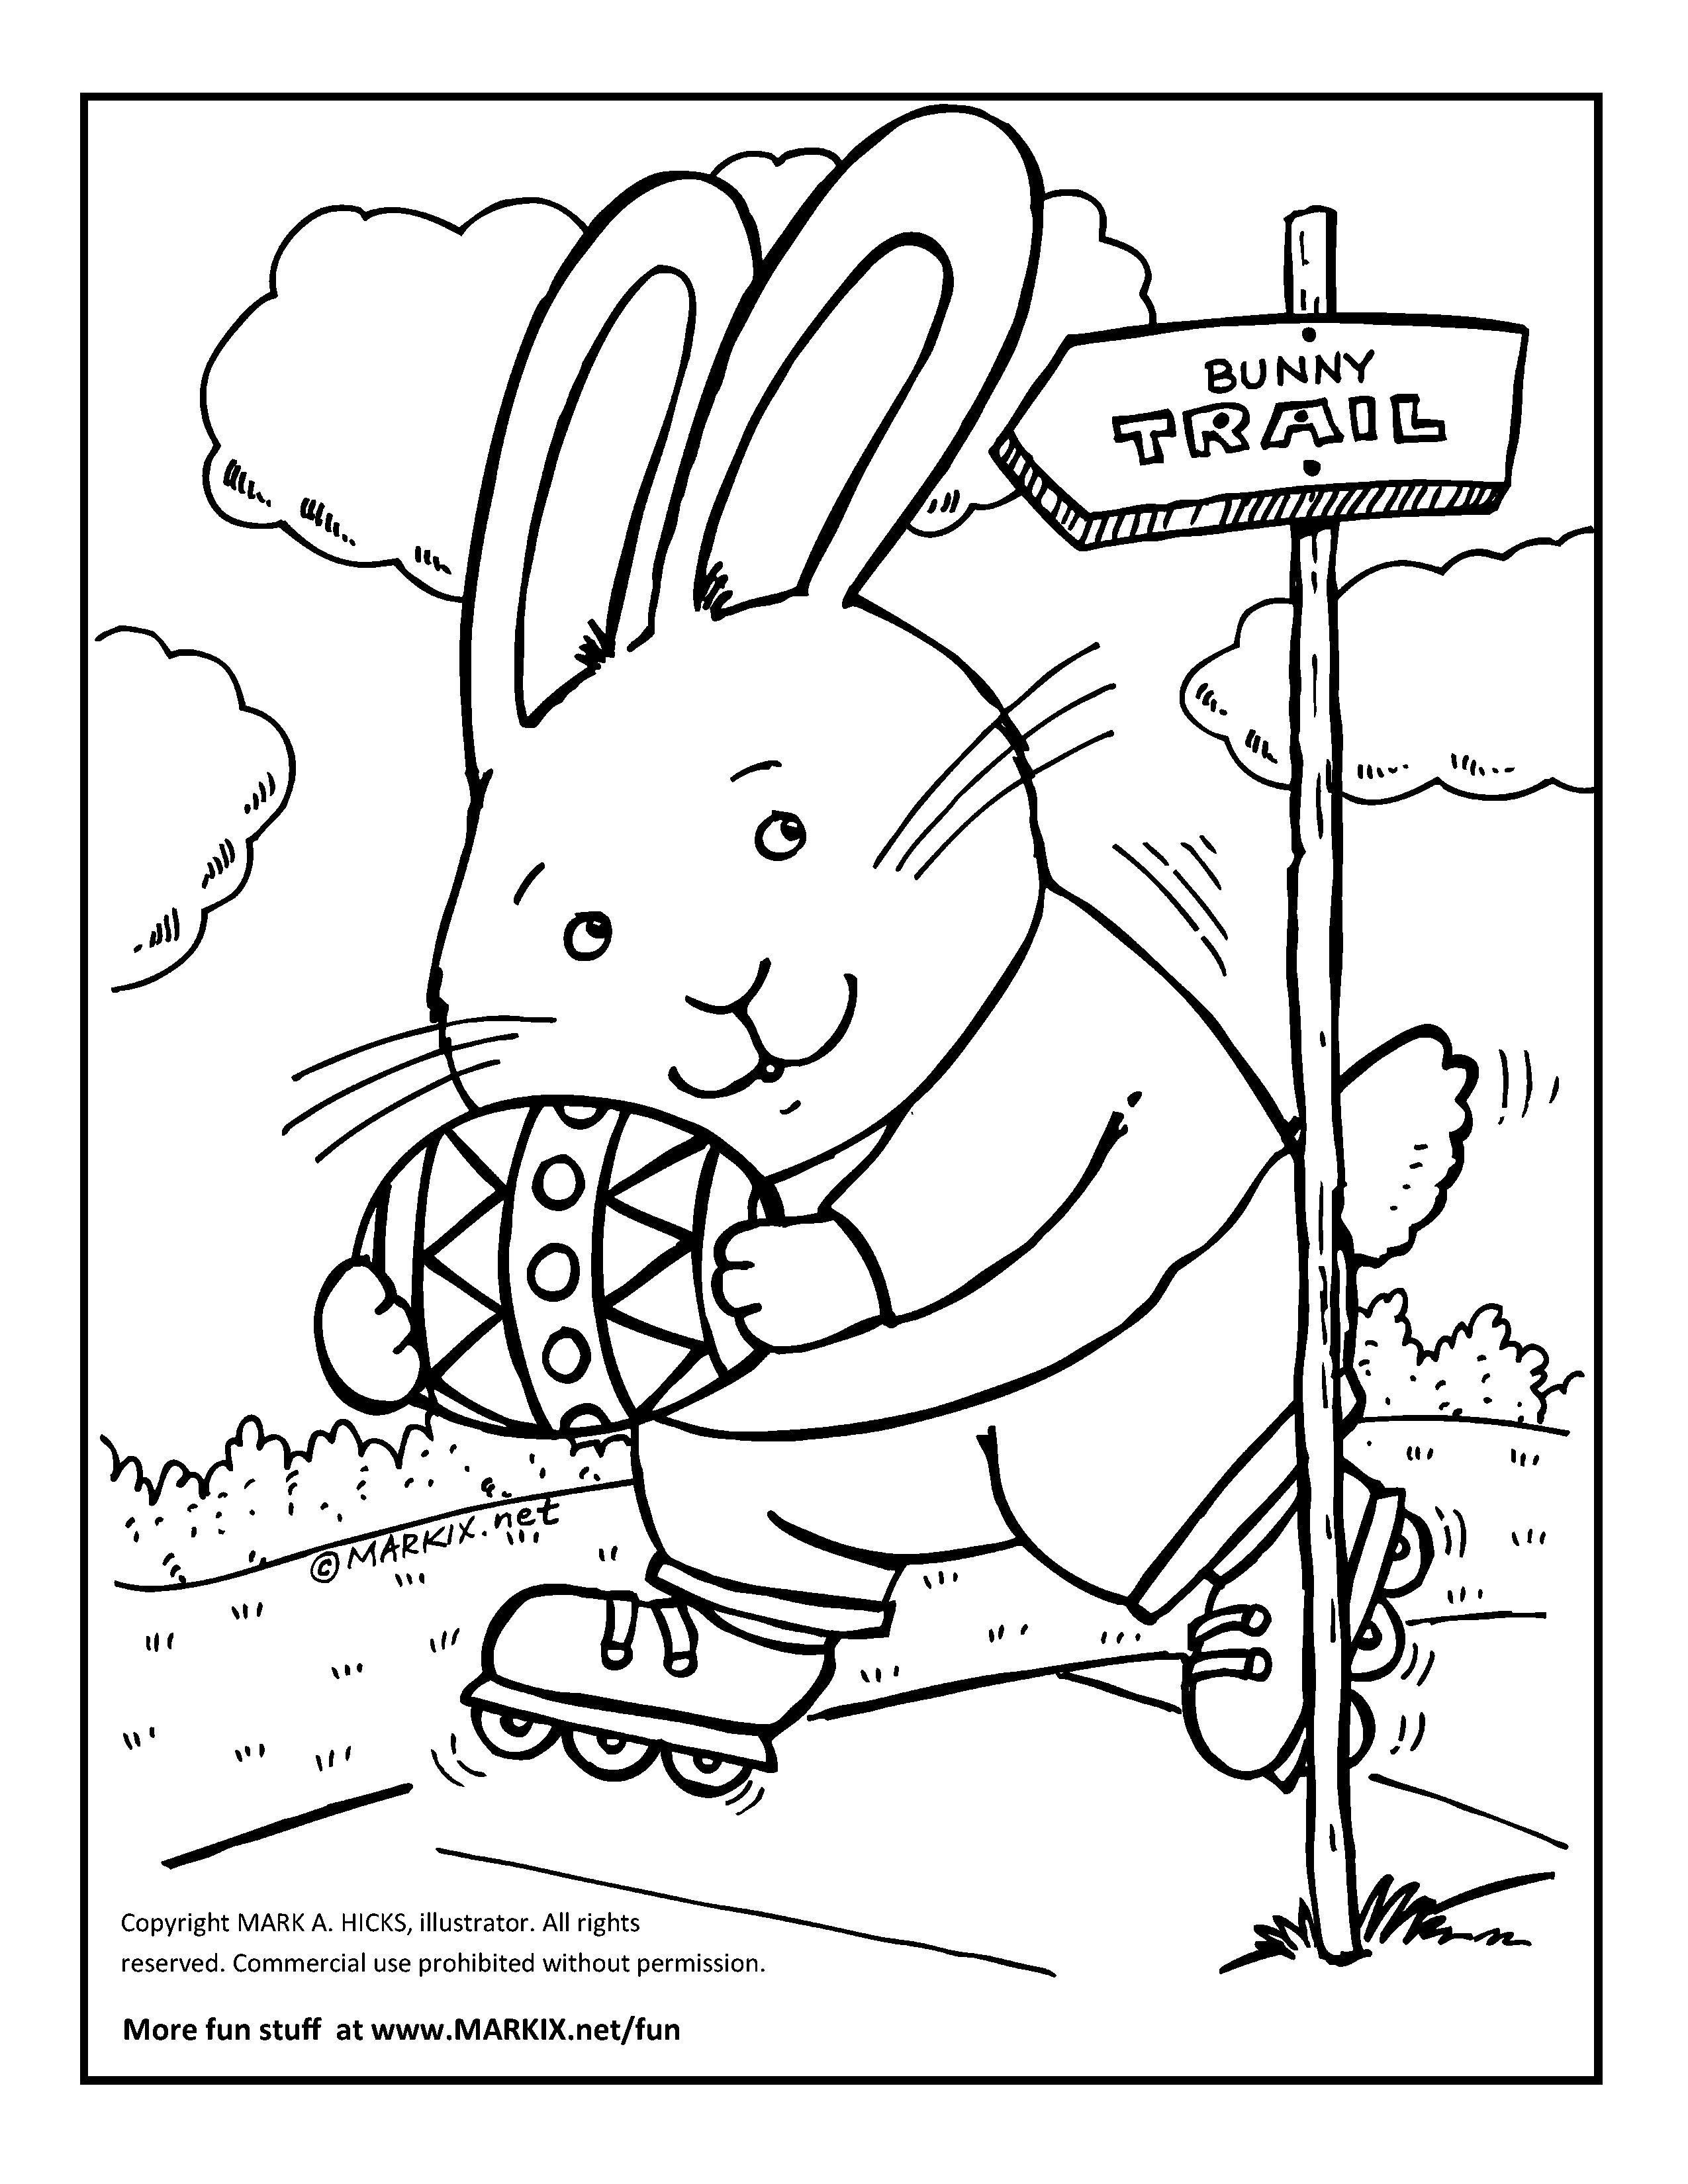 The Easter Bunny is skating down the bunny trail in this fun coloring page